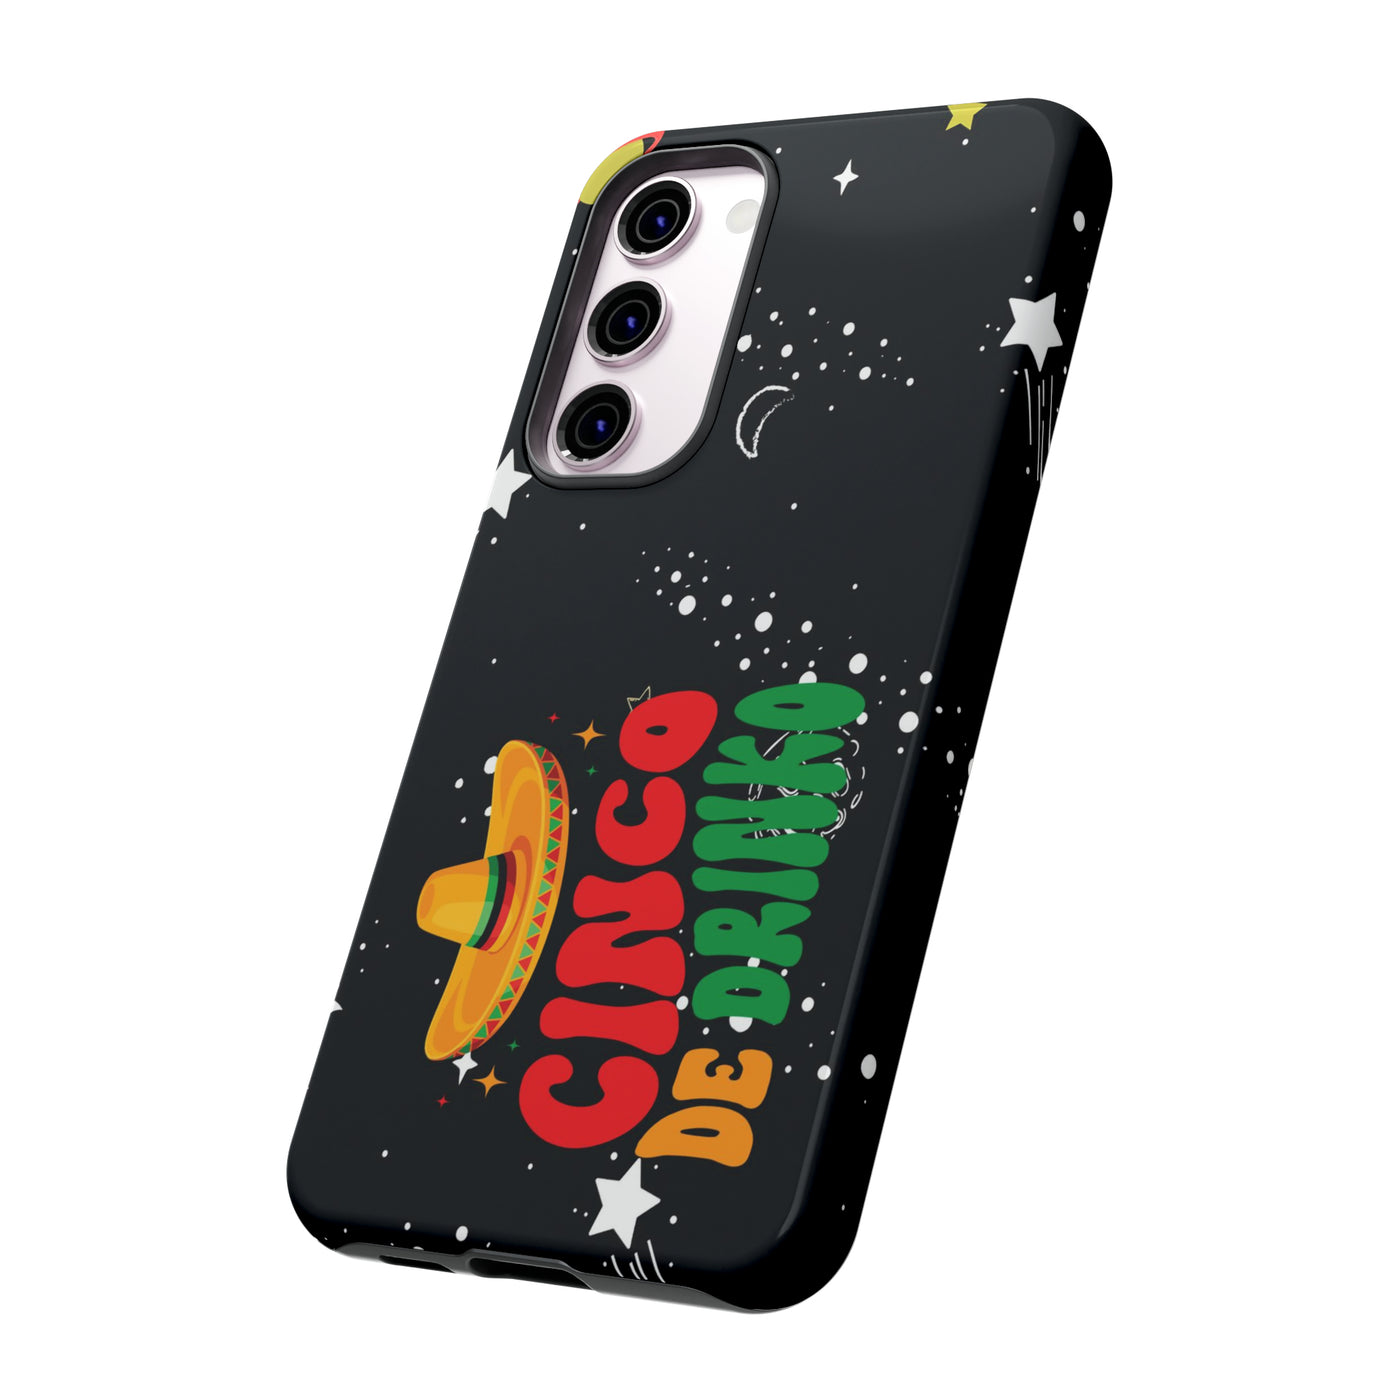 Samsung Galaxy Phone Case | Galaxy S23, S22, S21, S20 | Luxury Case Double Layered | Impact Resistant | Fashionable - Cinco De Mayo